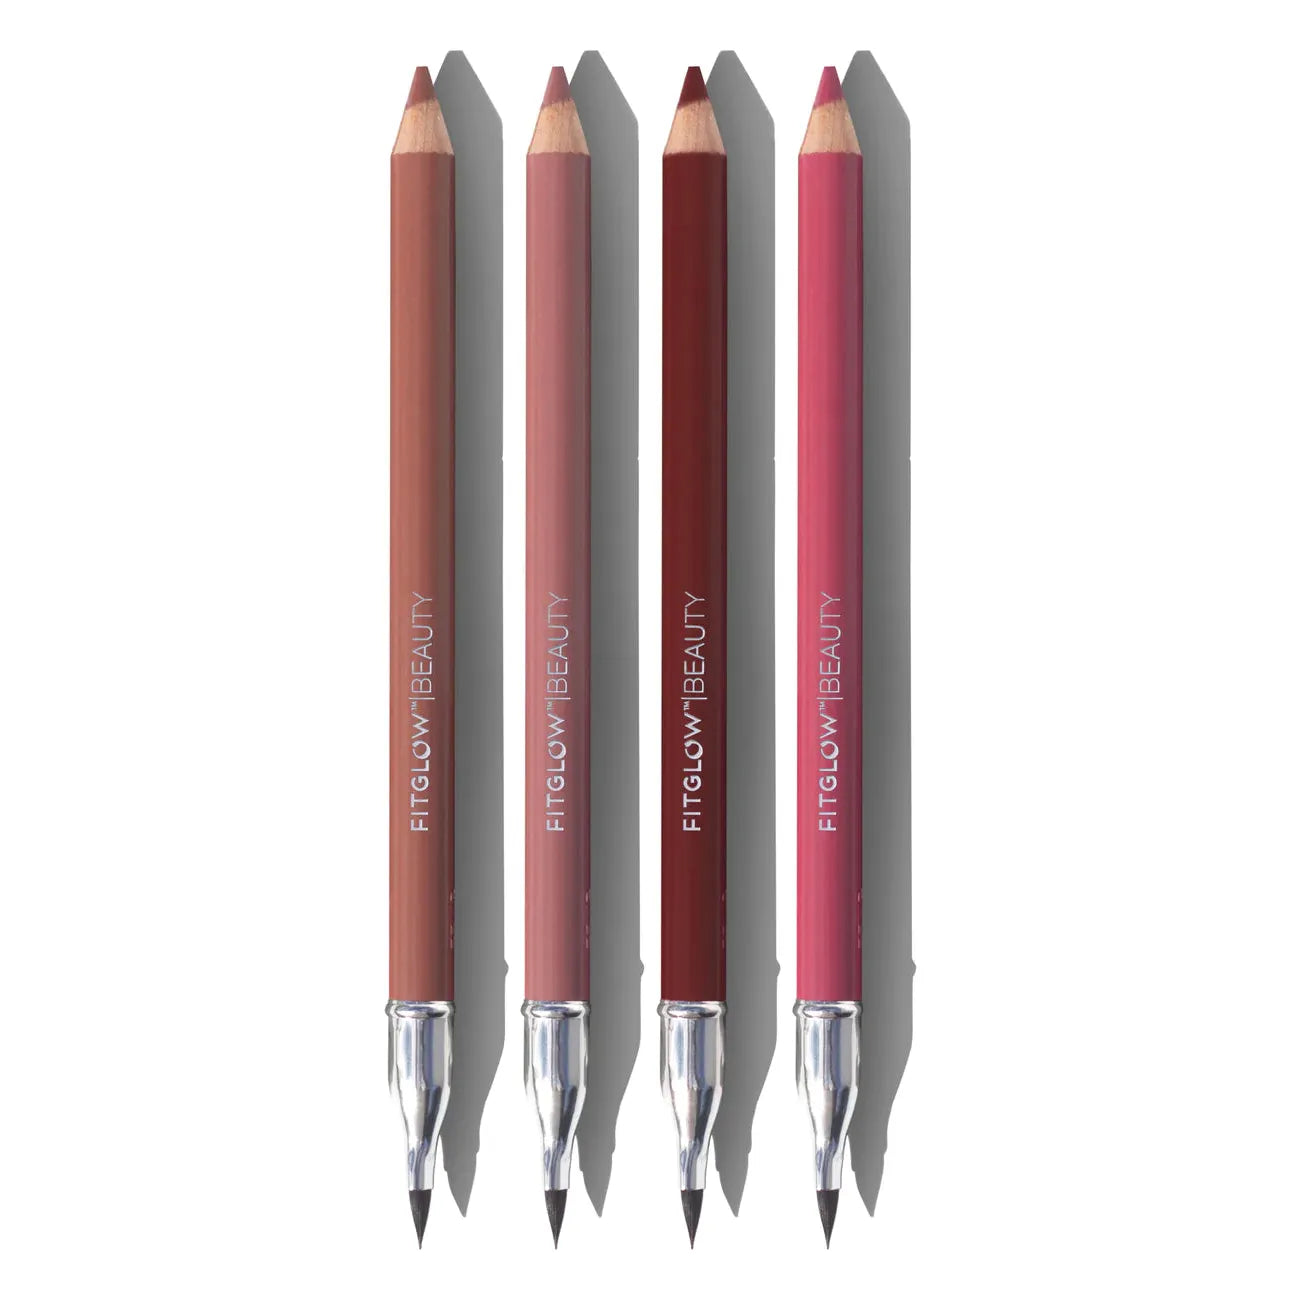 Fitglow Beauty Naturally Nude Lip Liner Set ($96 value)